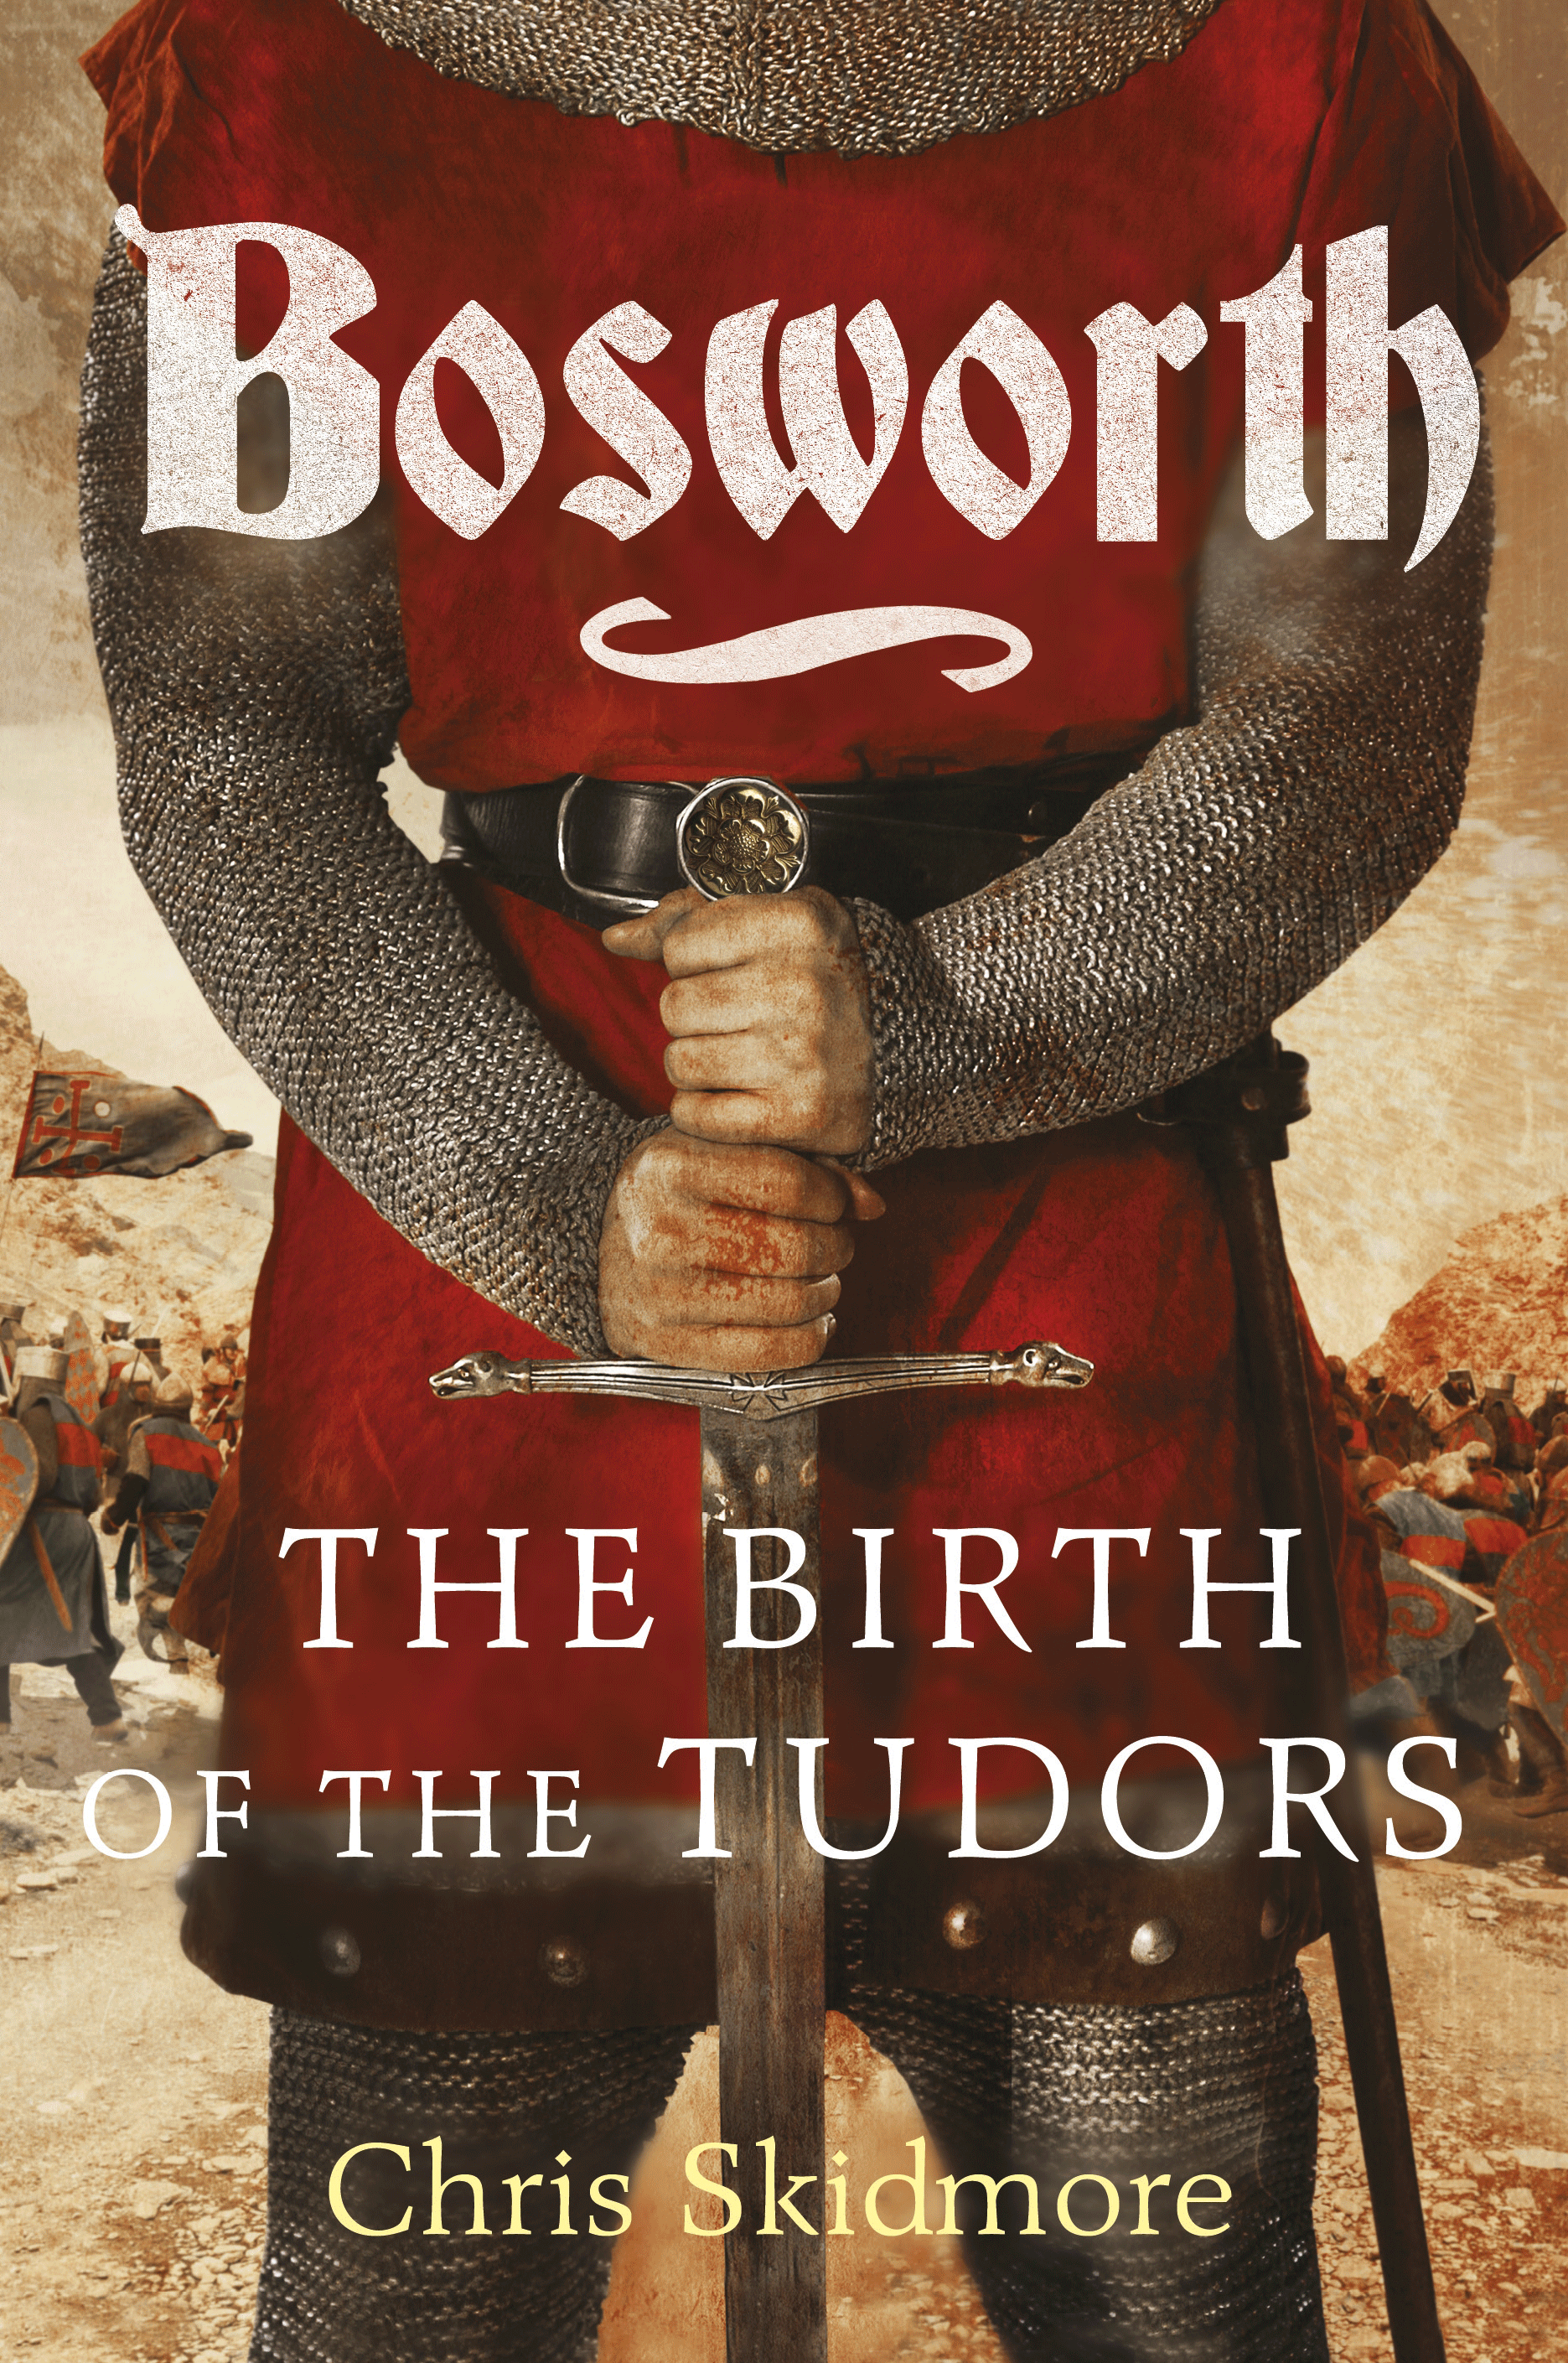 Bosworth: The Rise of the Tudors